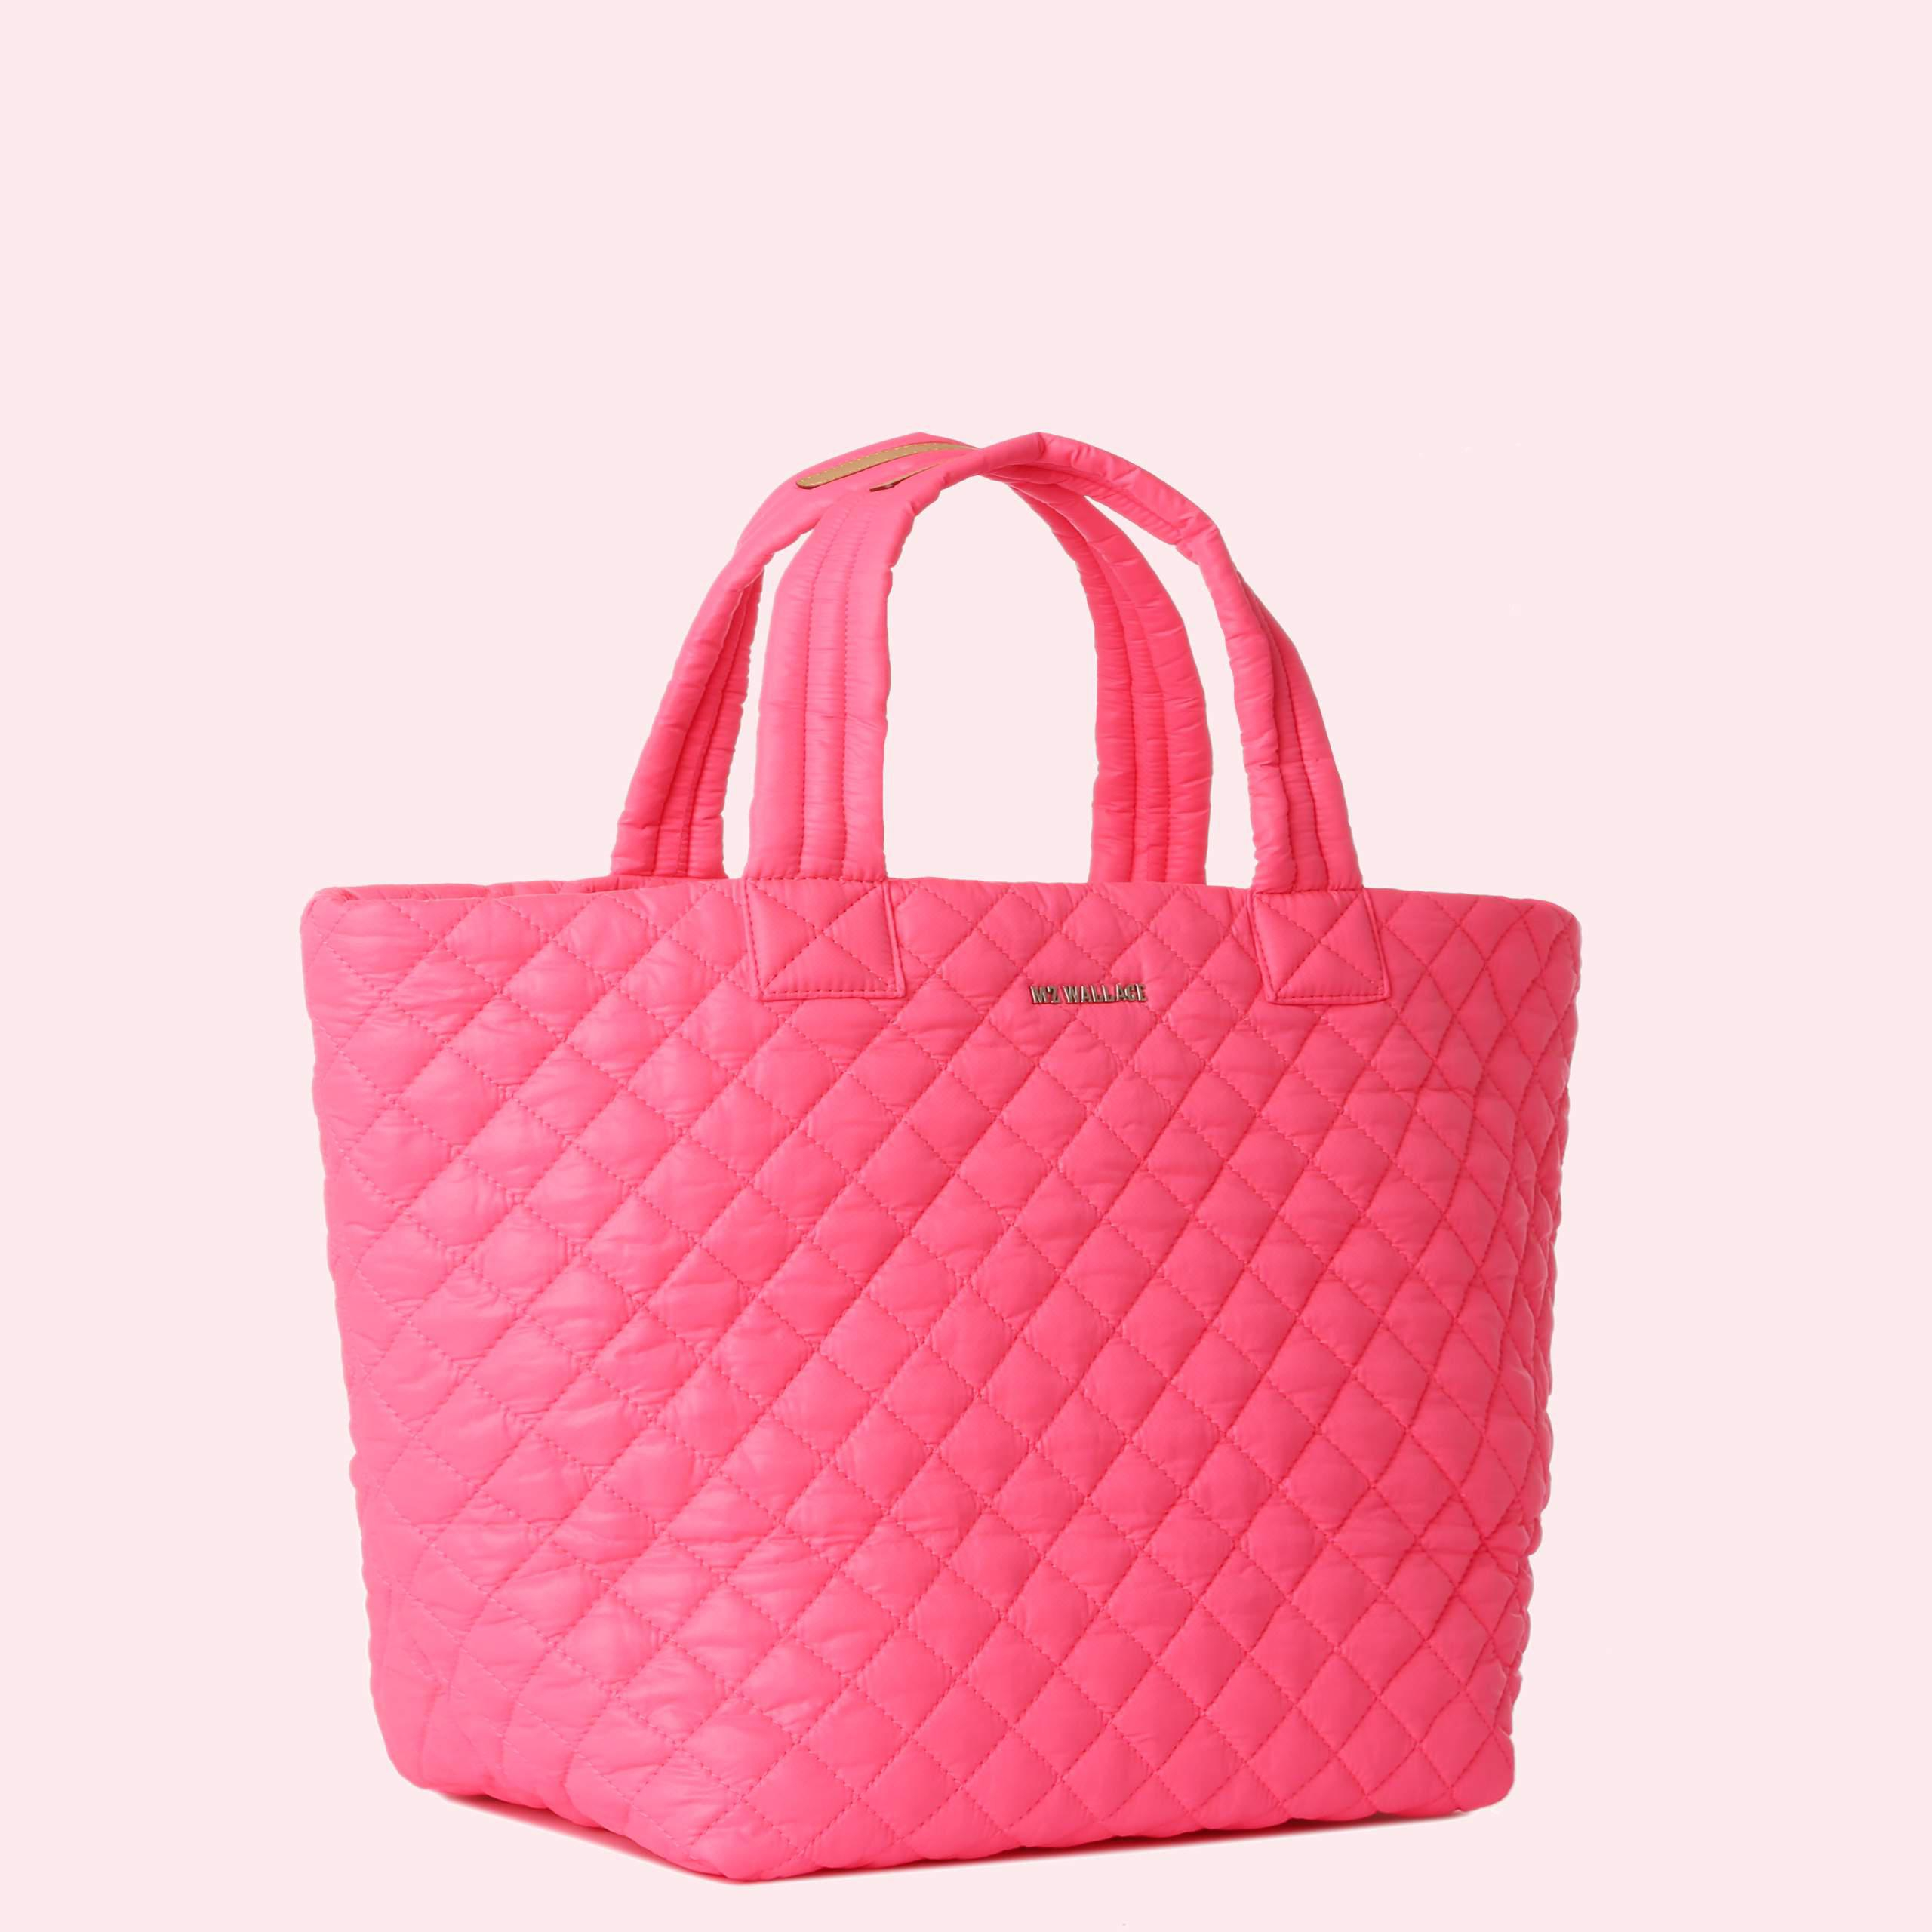 Mz wallace Small Metro Tote Neon Pink in Pink | Lyst